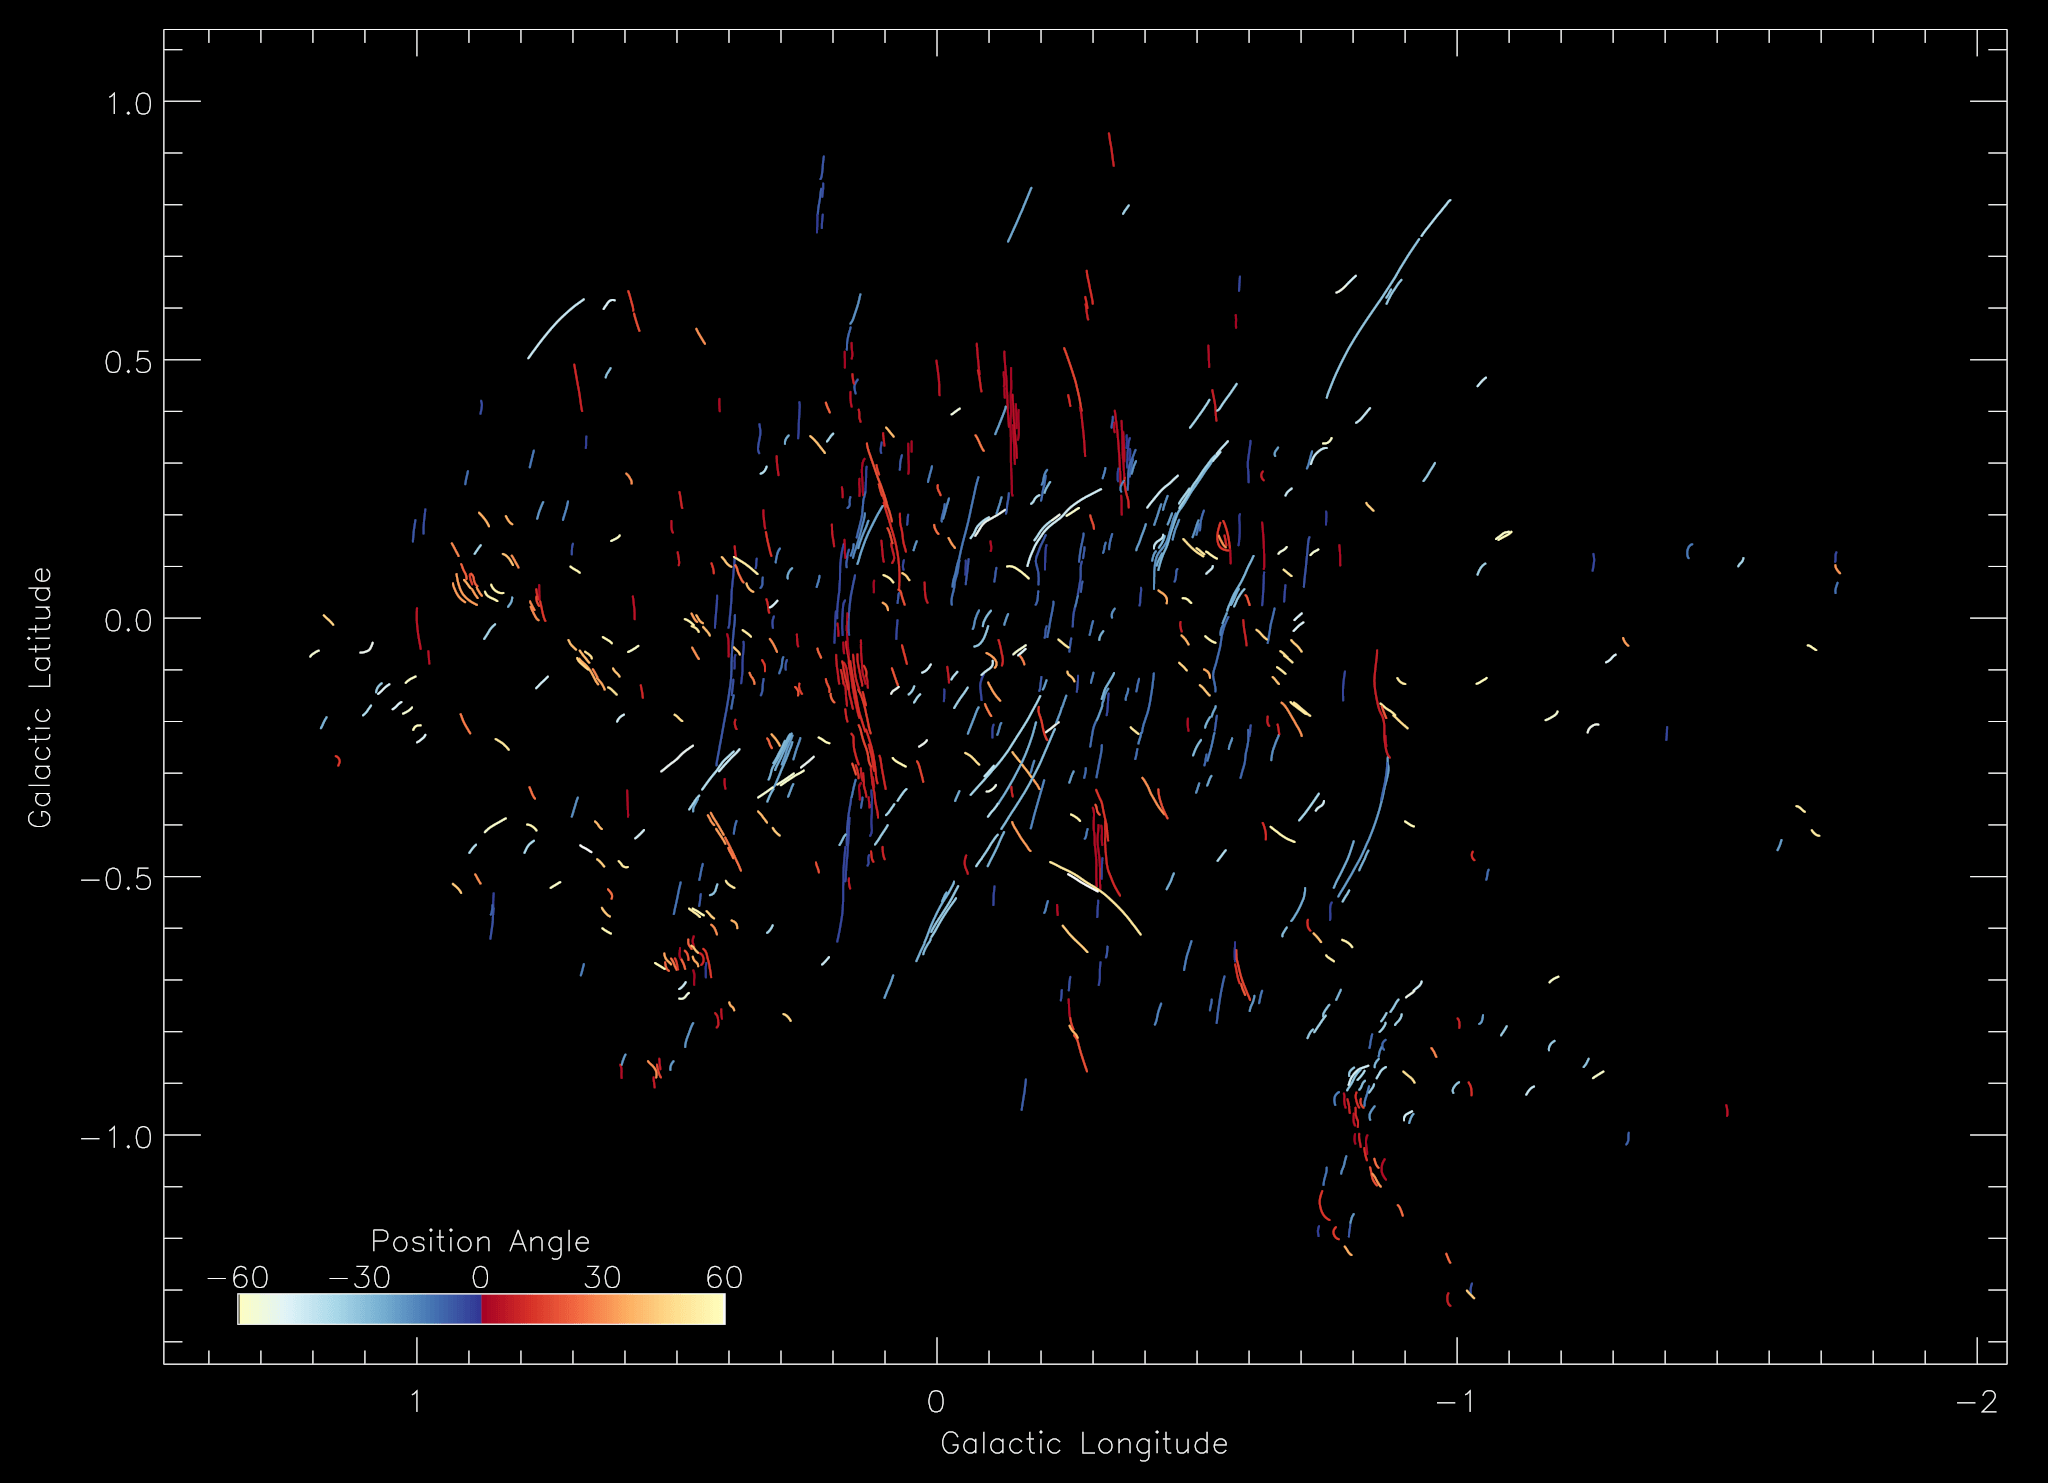 MeerKAT image of the galactic center with color-coded position angles of the long, vertical filaments.